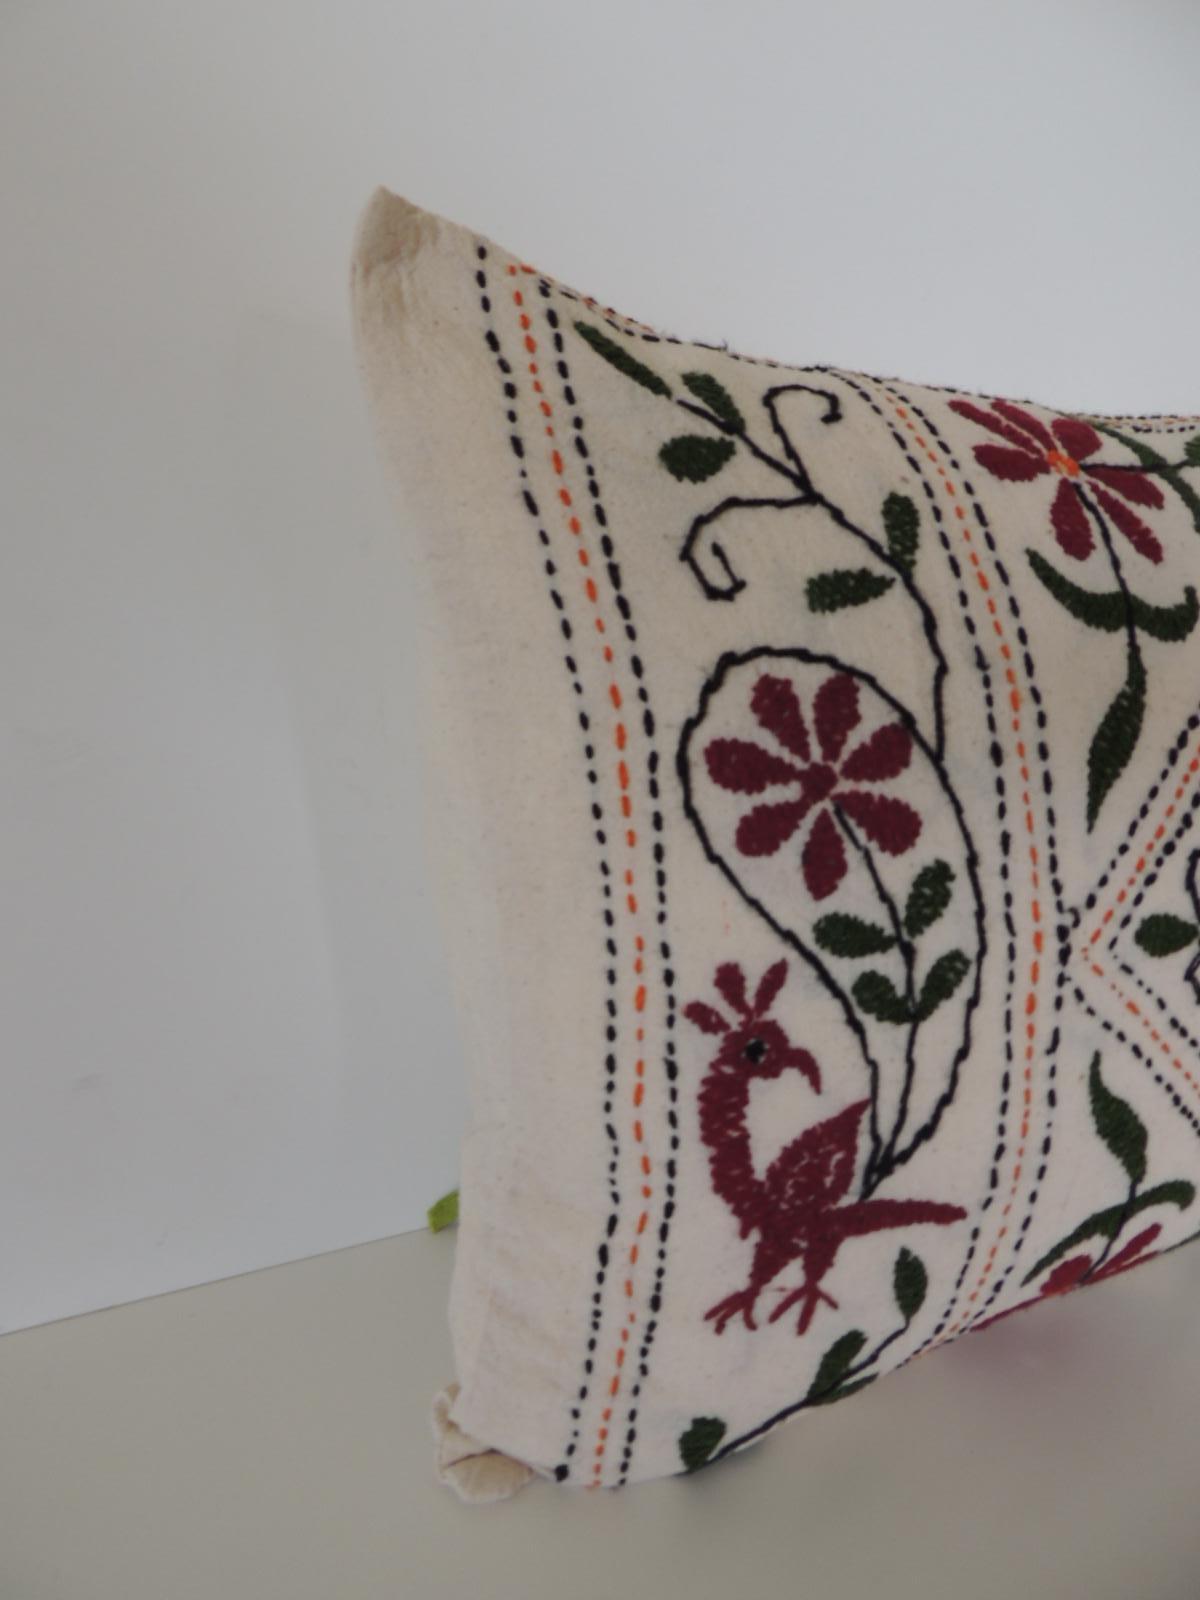 Vintage Indian colorful floral embroidered decorative bolster pillow.
Green and red hand embroidered pillow. Same linen backing. Depicting peacocks.
Decorative pillow handcrafted and designed in the USA. Closure by stitch (no zipper closure)
with